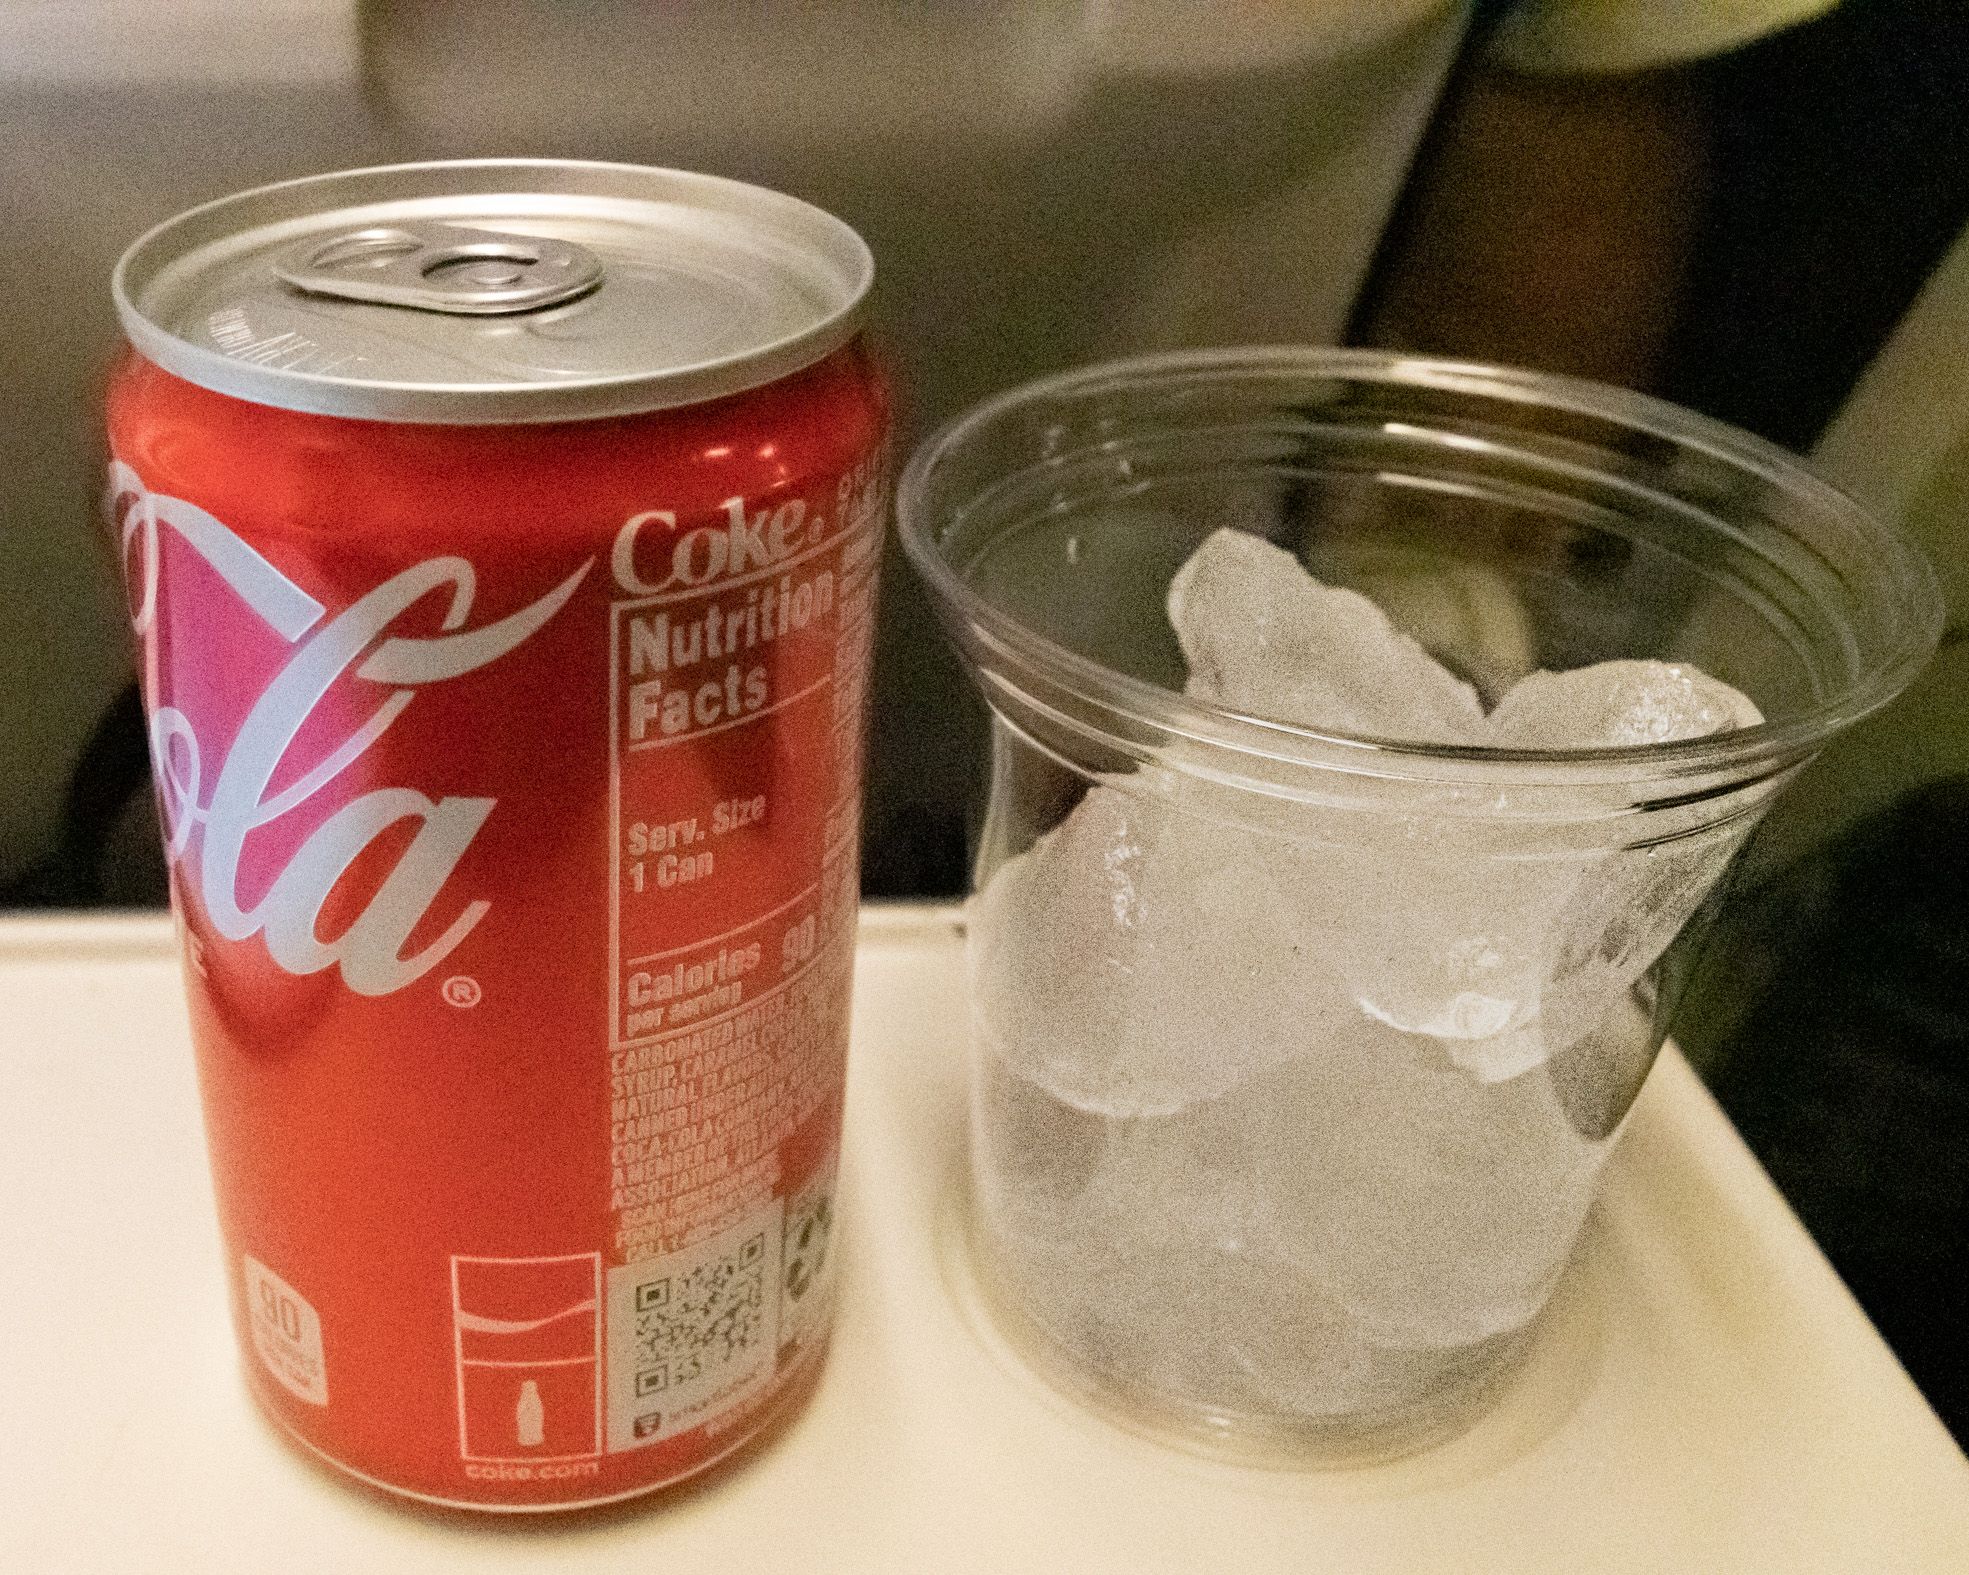 Coca-Cola in Small Can and Ice